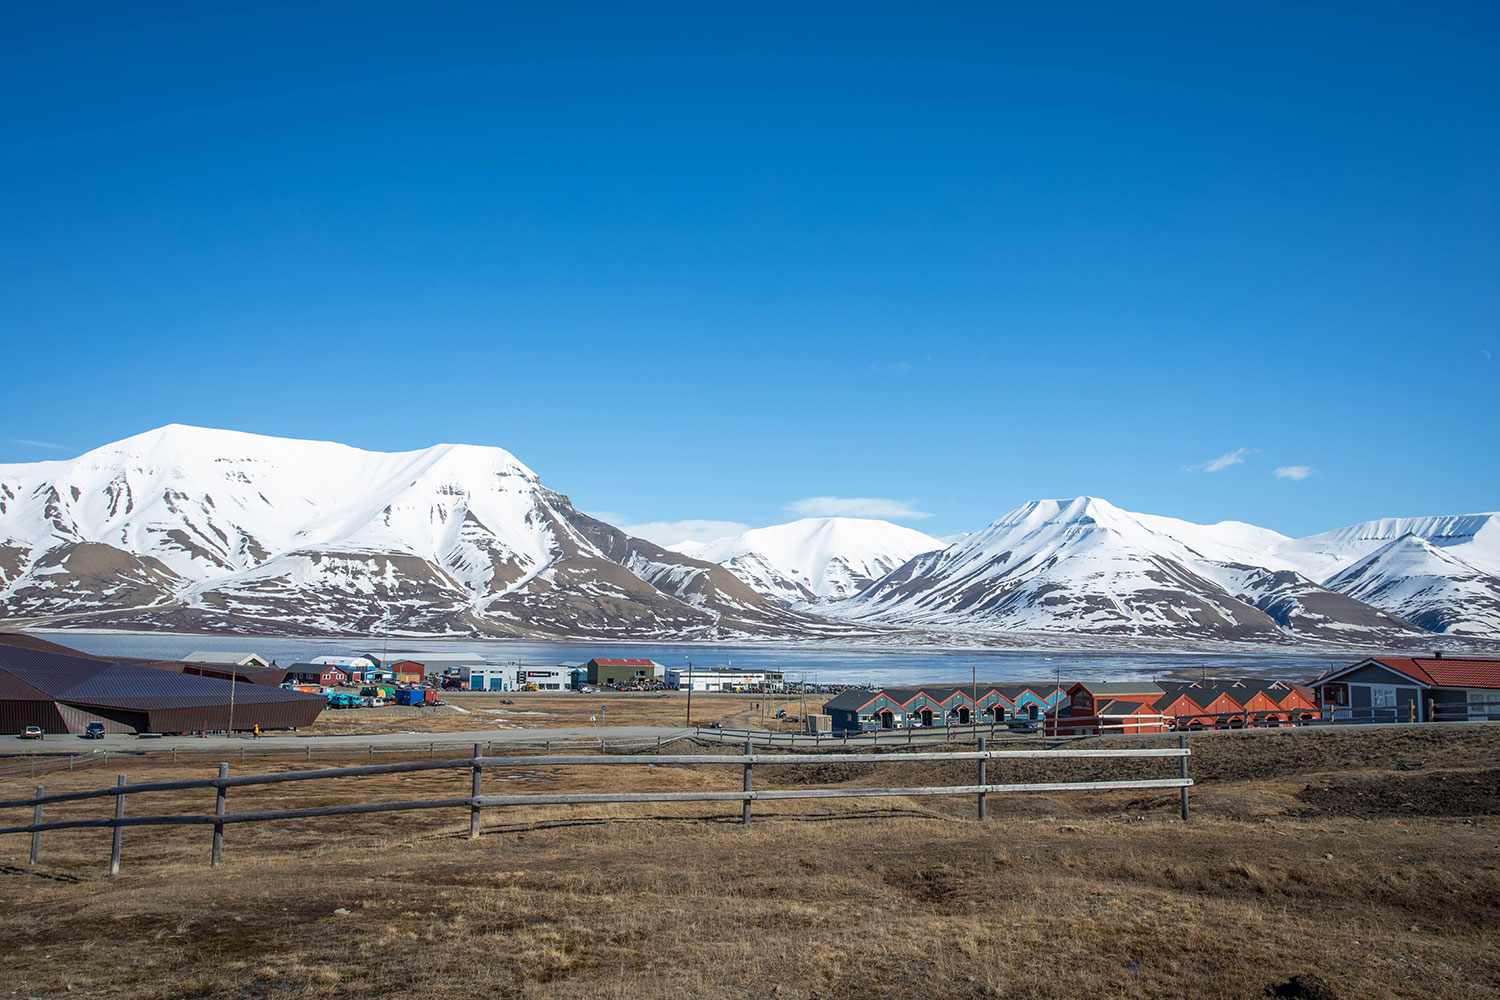 Plataberget Mountain overlooks Longyearbyen, the northernmost town in the world.